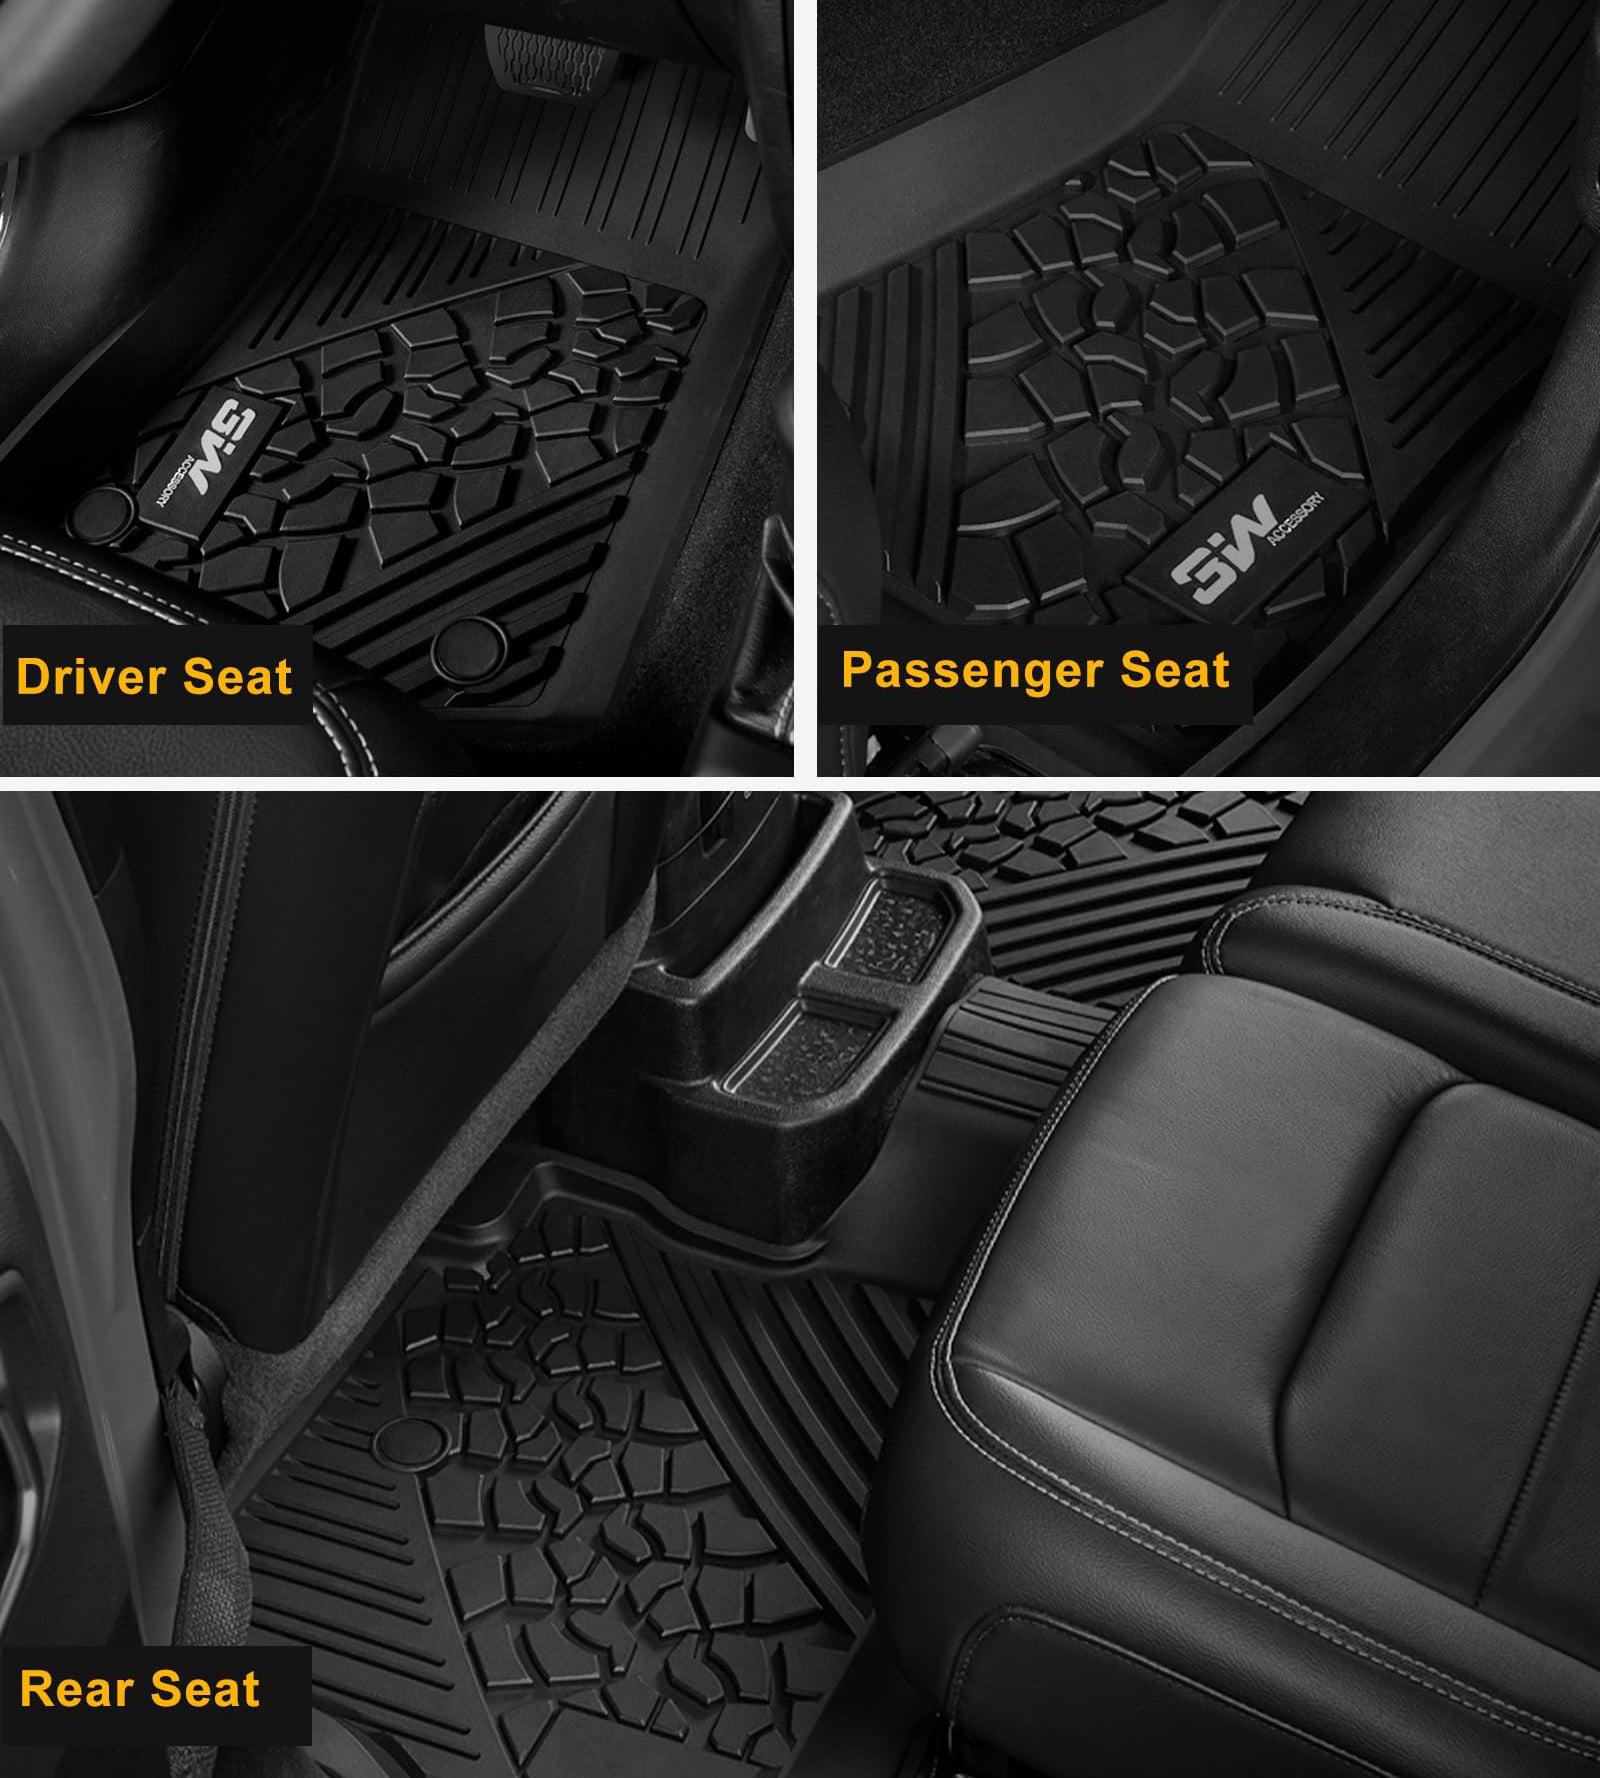 3W Jeep Wrangler JKU 2013-2018 Unlimited 4 Door Only Custom Floor Mats TPE Material & All-Weather Protection Vehicles & Parts 3Wliners   